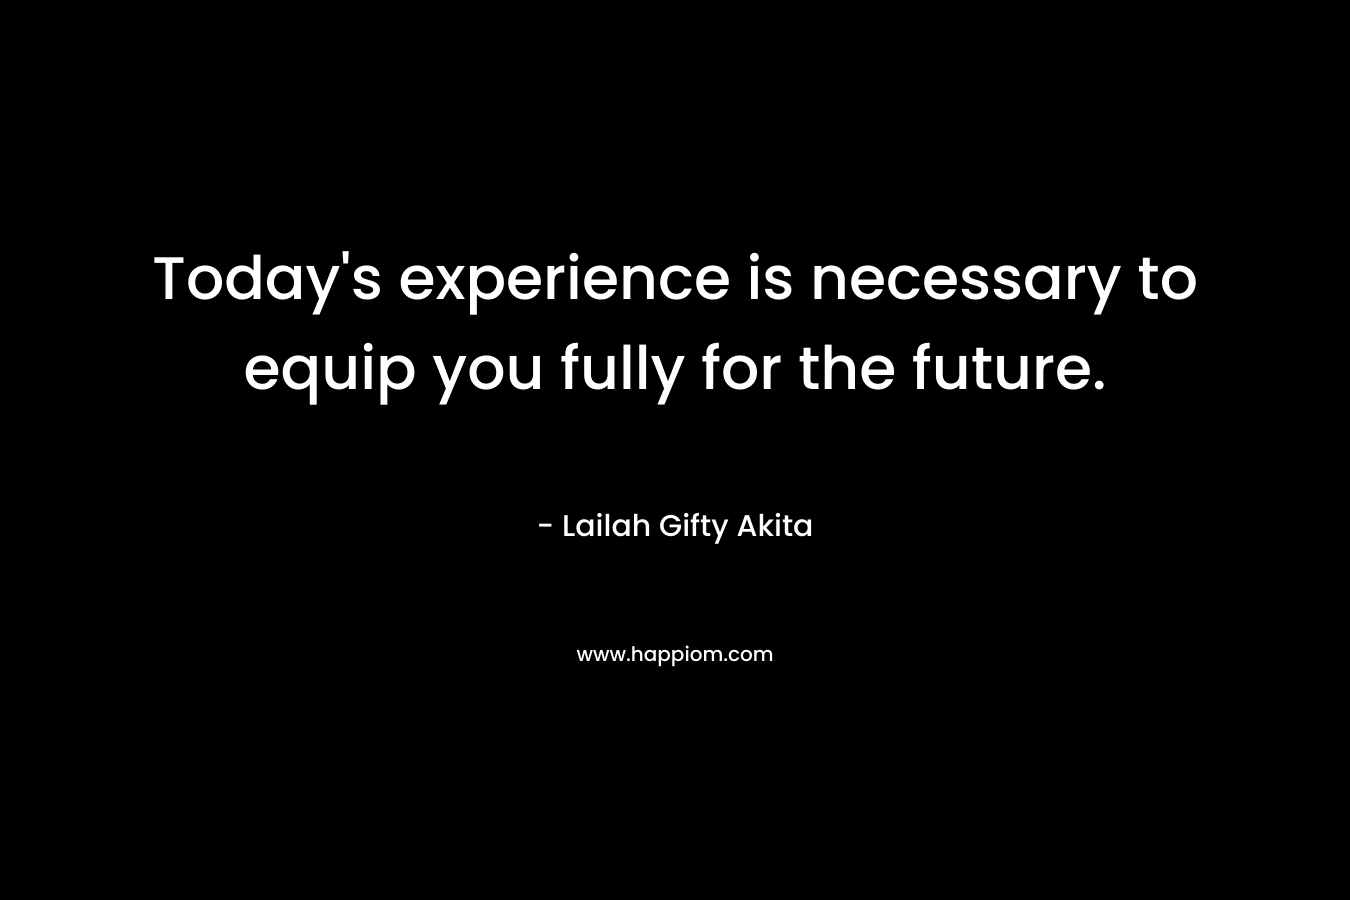 Today's experience is necessary to equip you fully for the future.